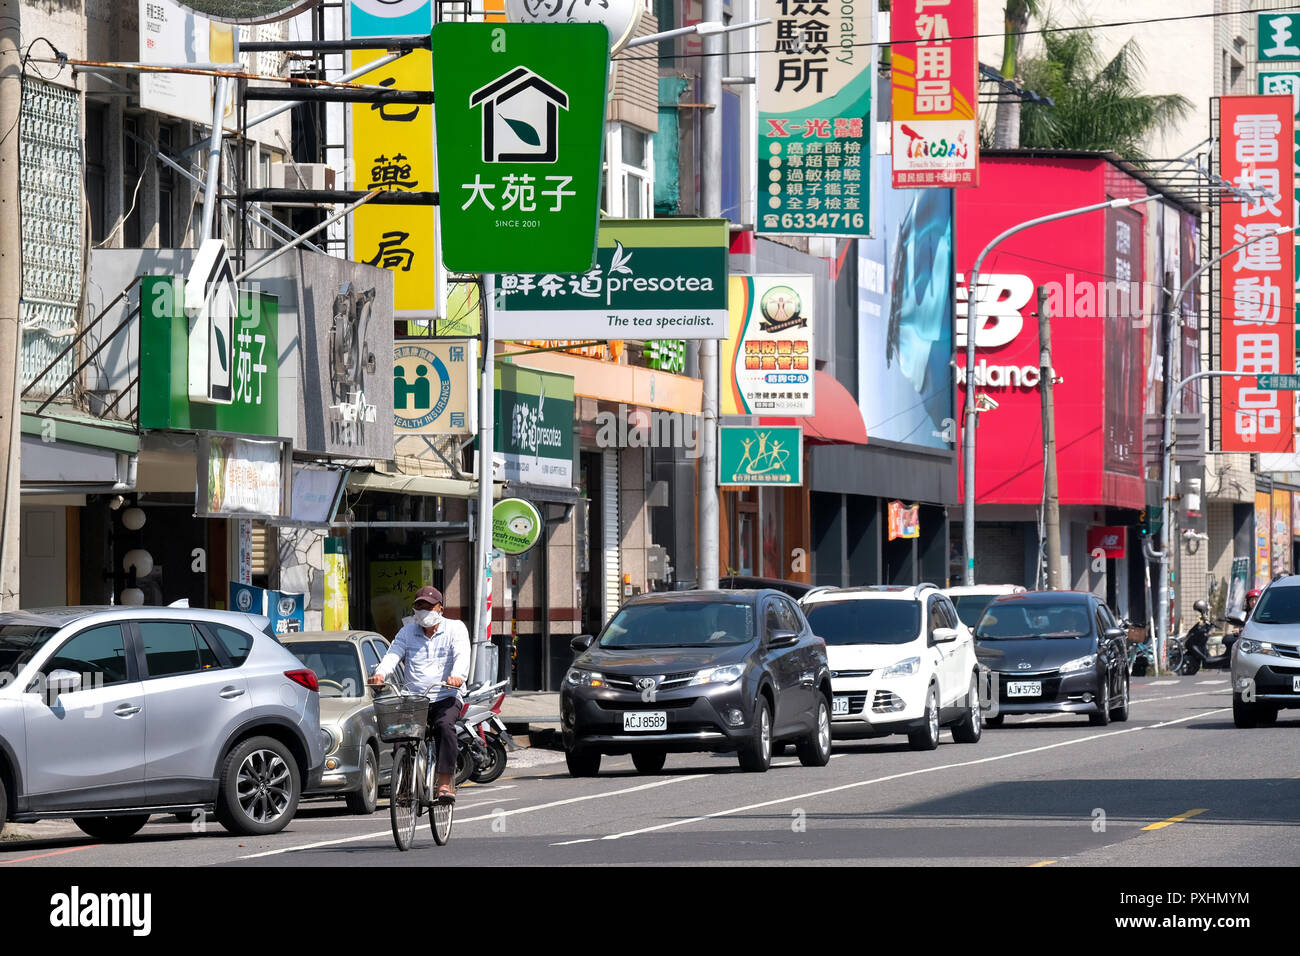 Colorful signs and billboards, street scene in the city Xinying, Taiwan Stock Photo